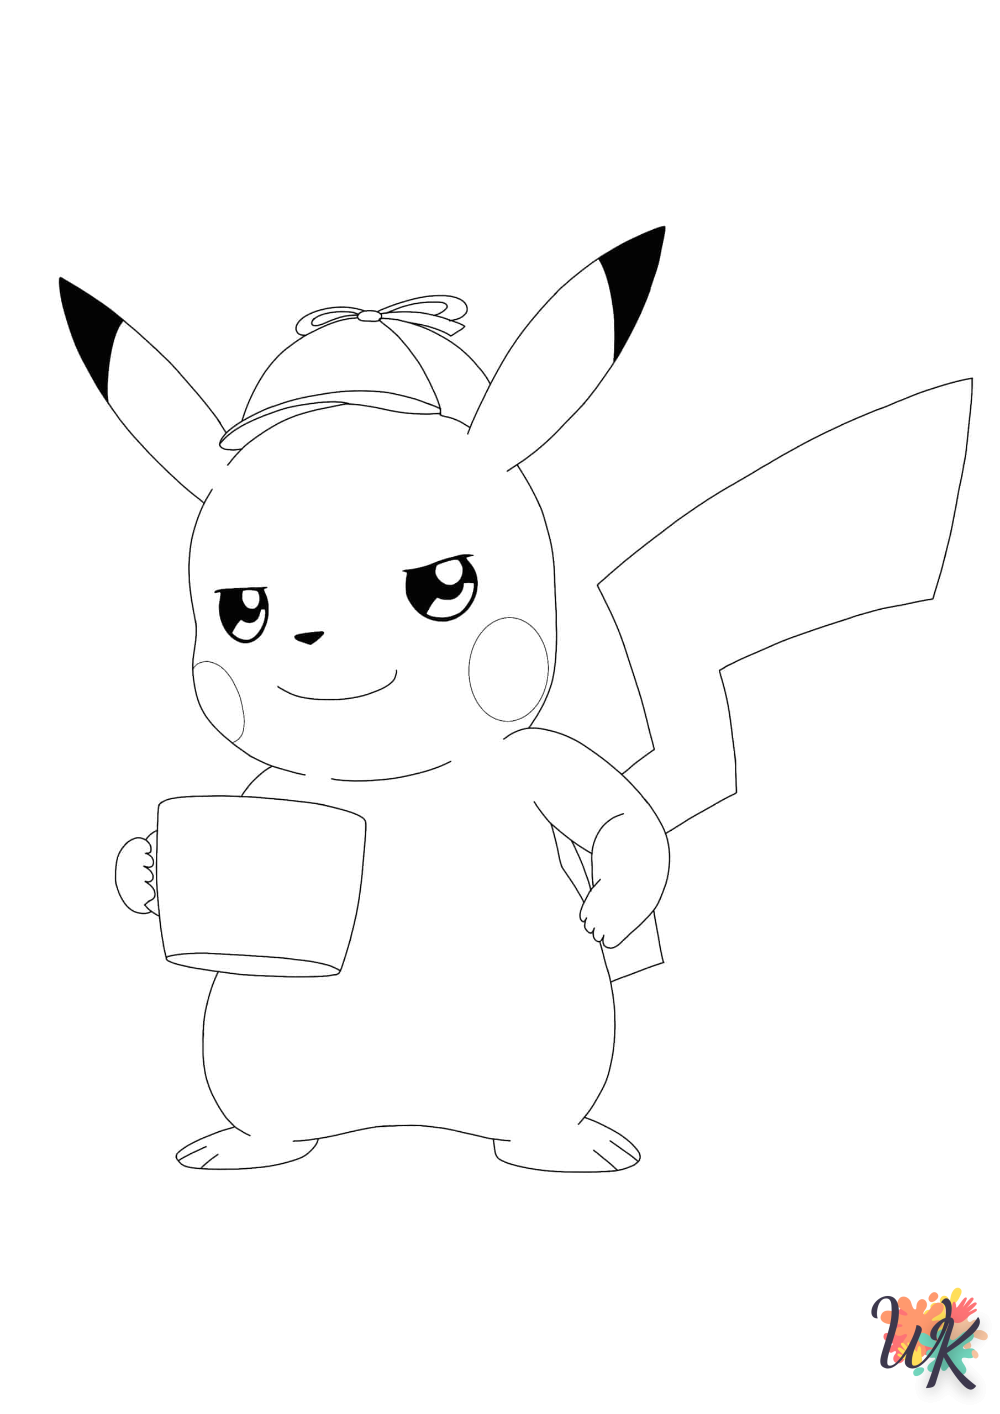 detailed Pikachu coloring pages for adults